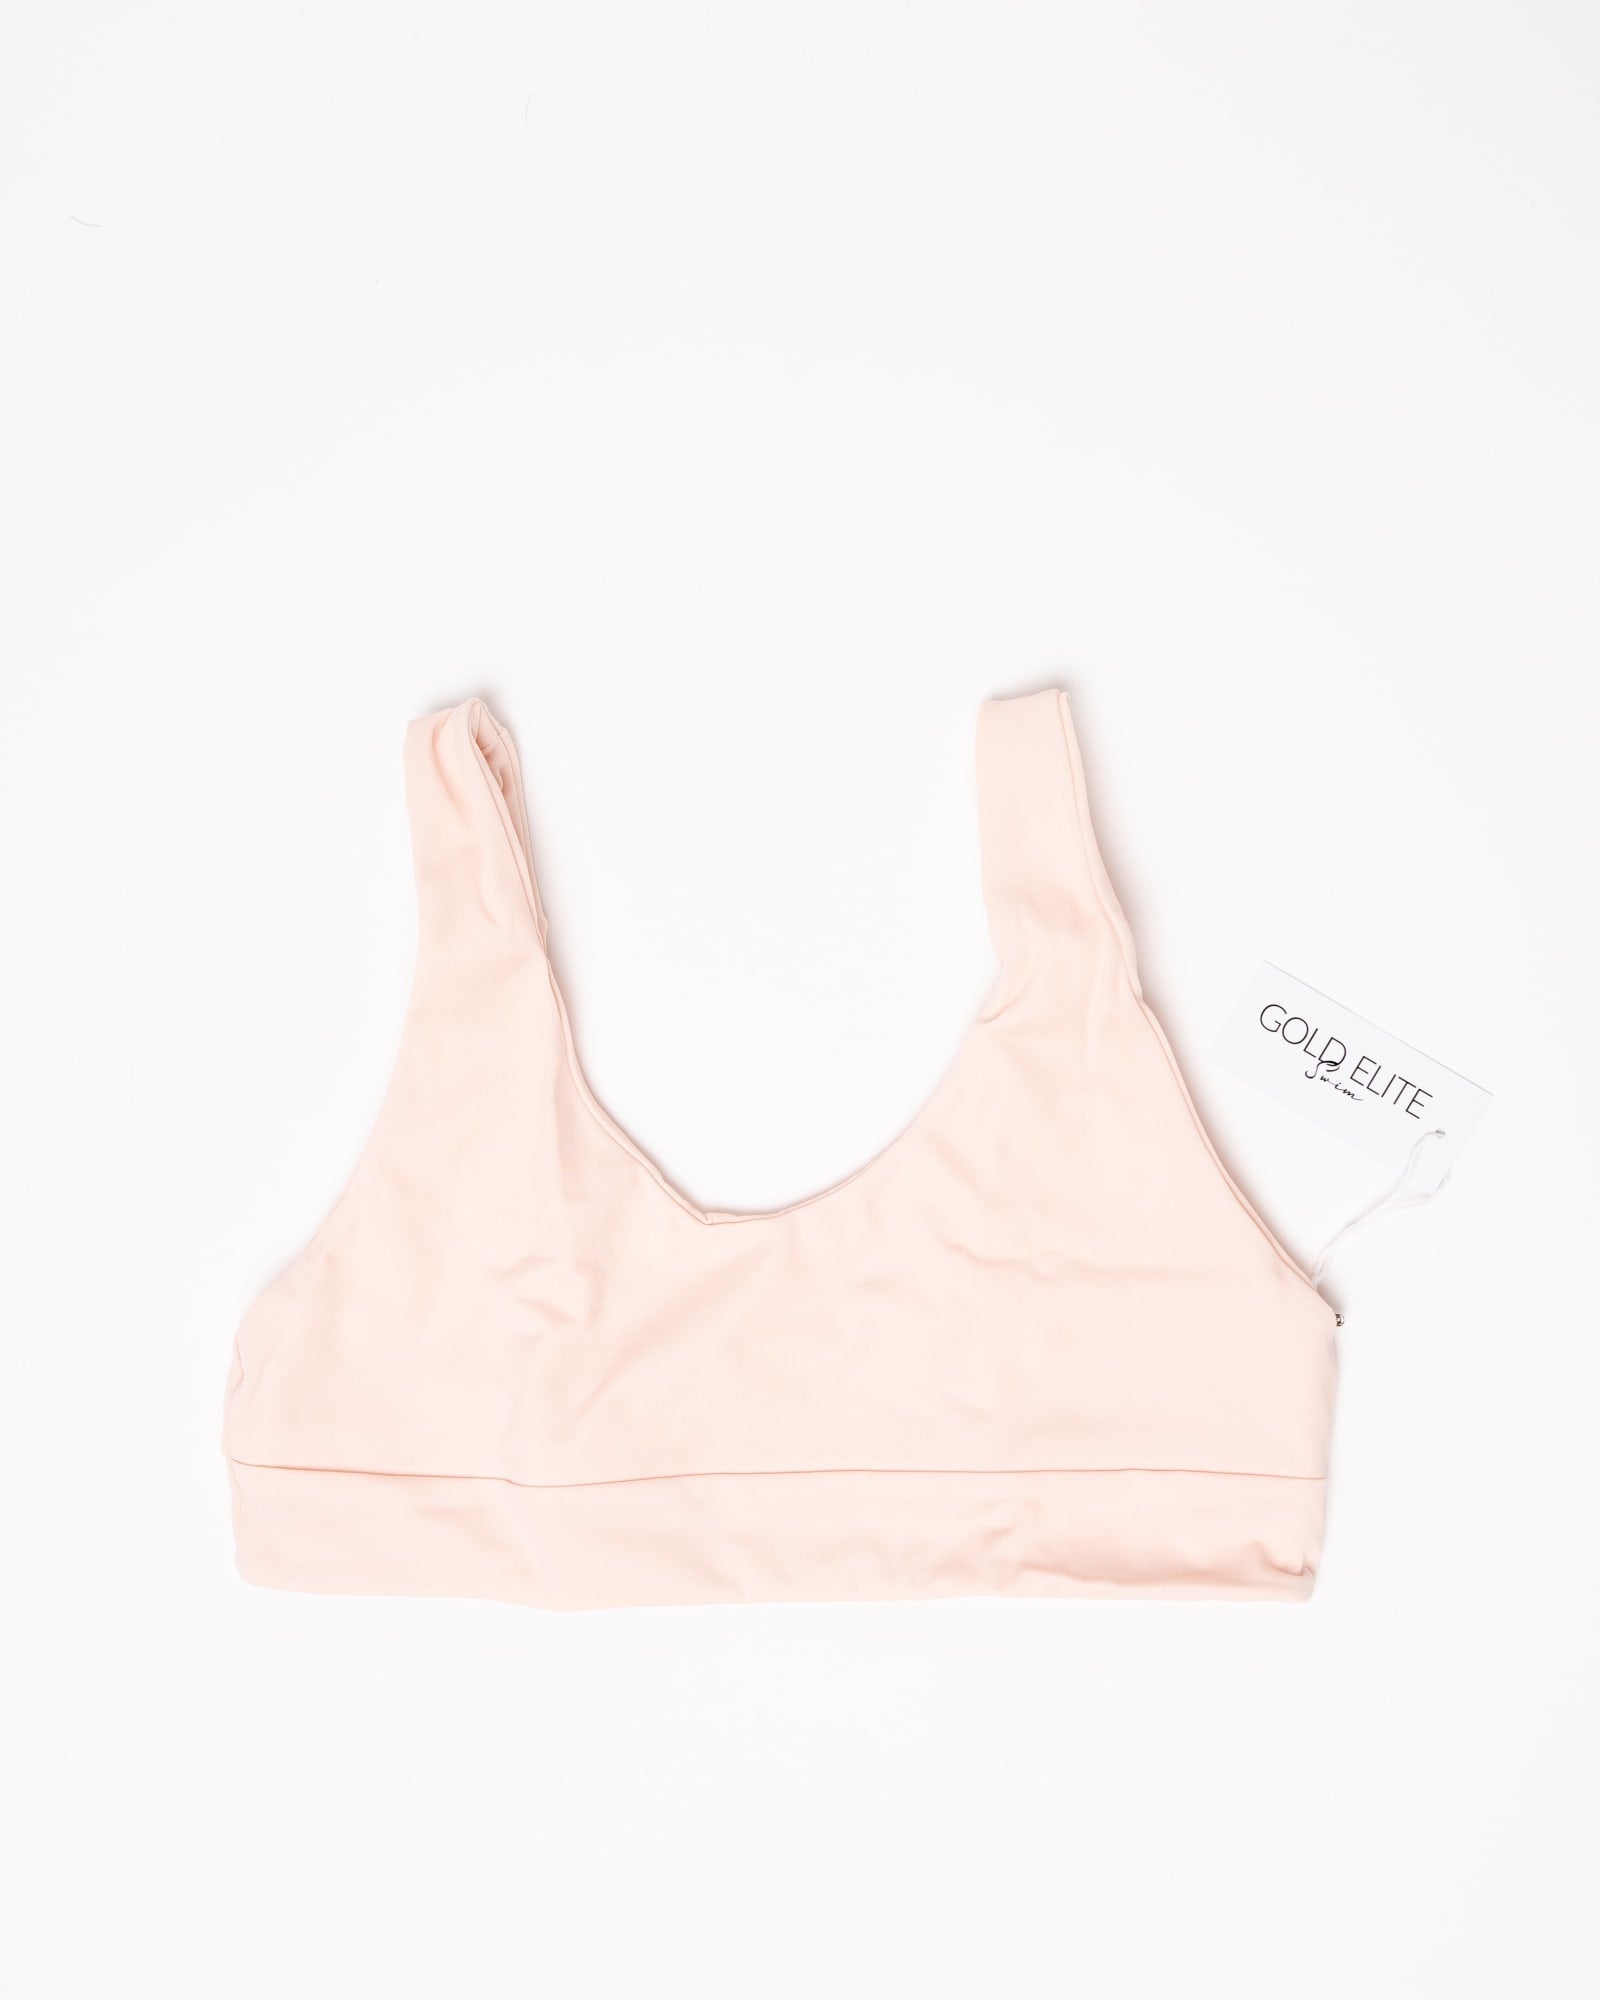 The Lightweight Bra That's 'Perfect for Hot Summer Days' Is Just